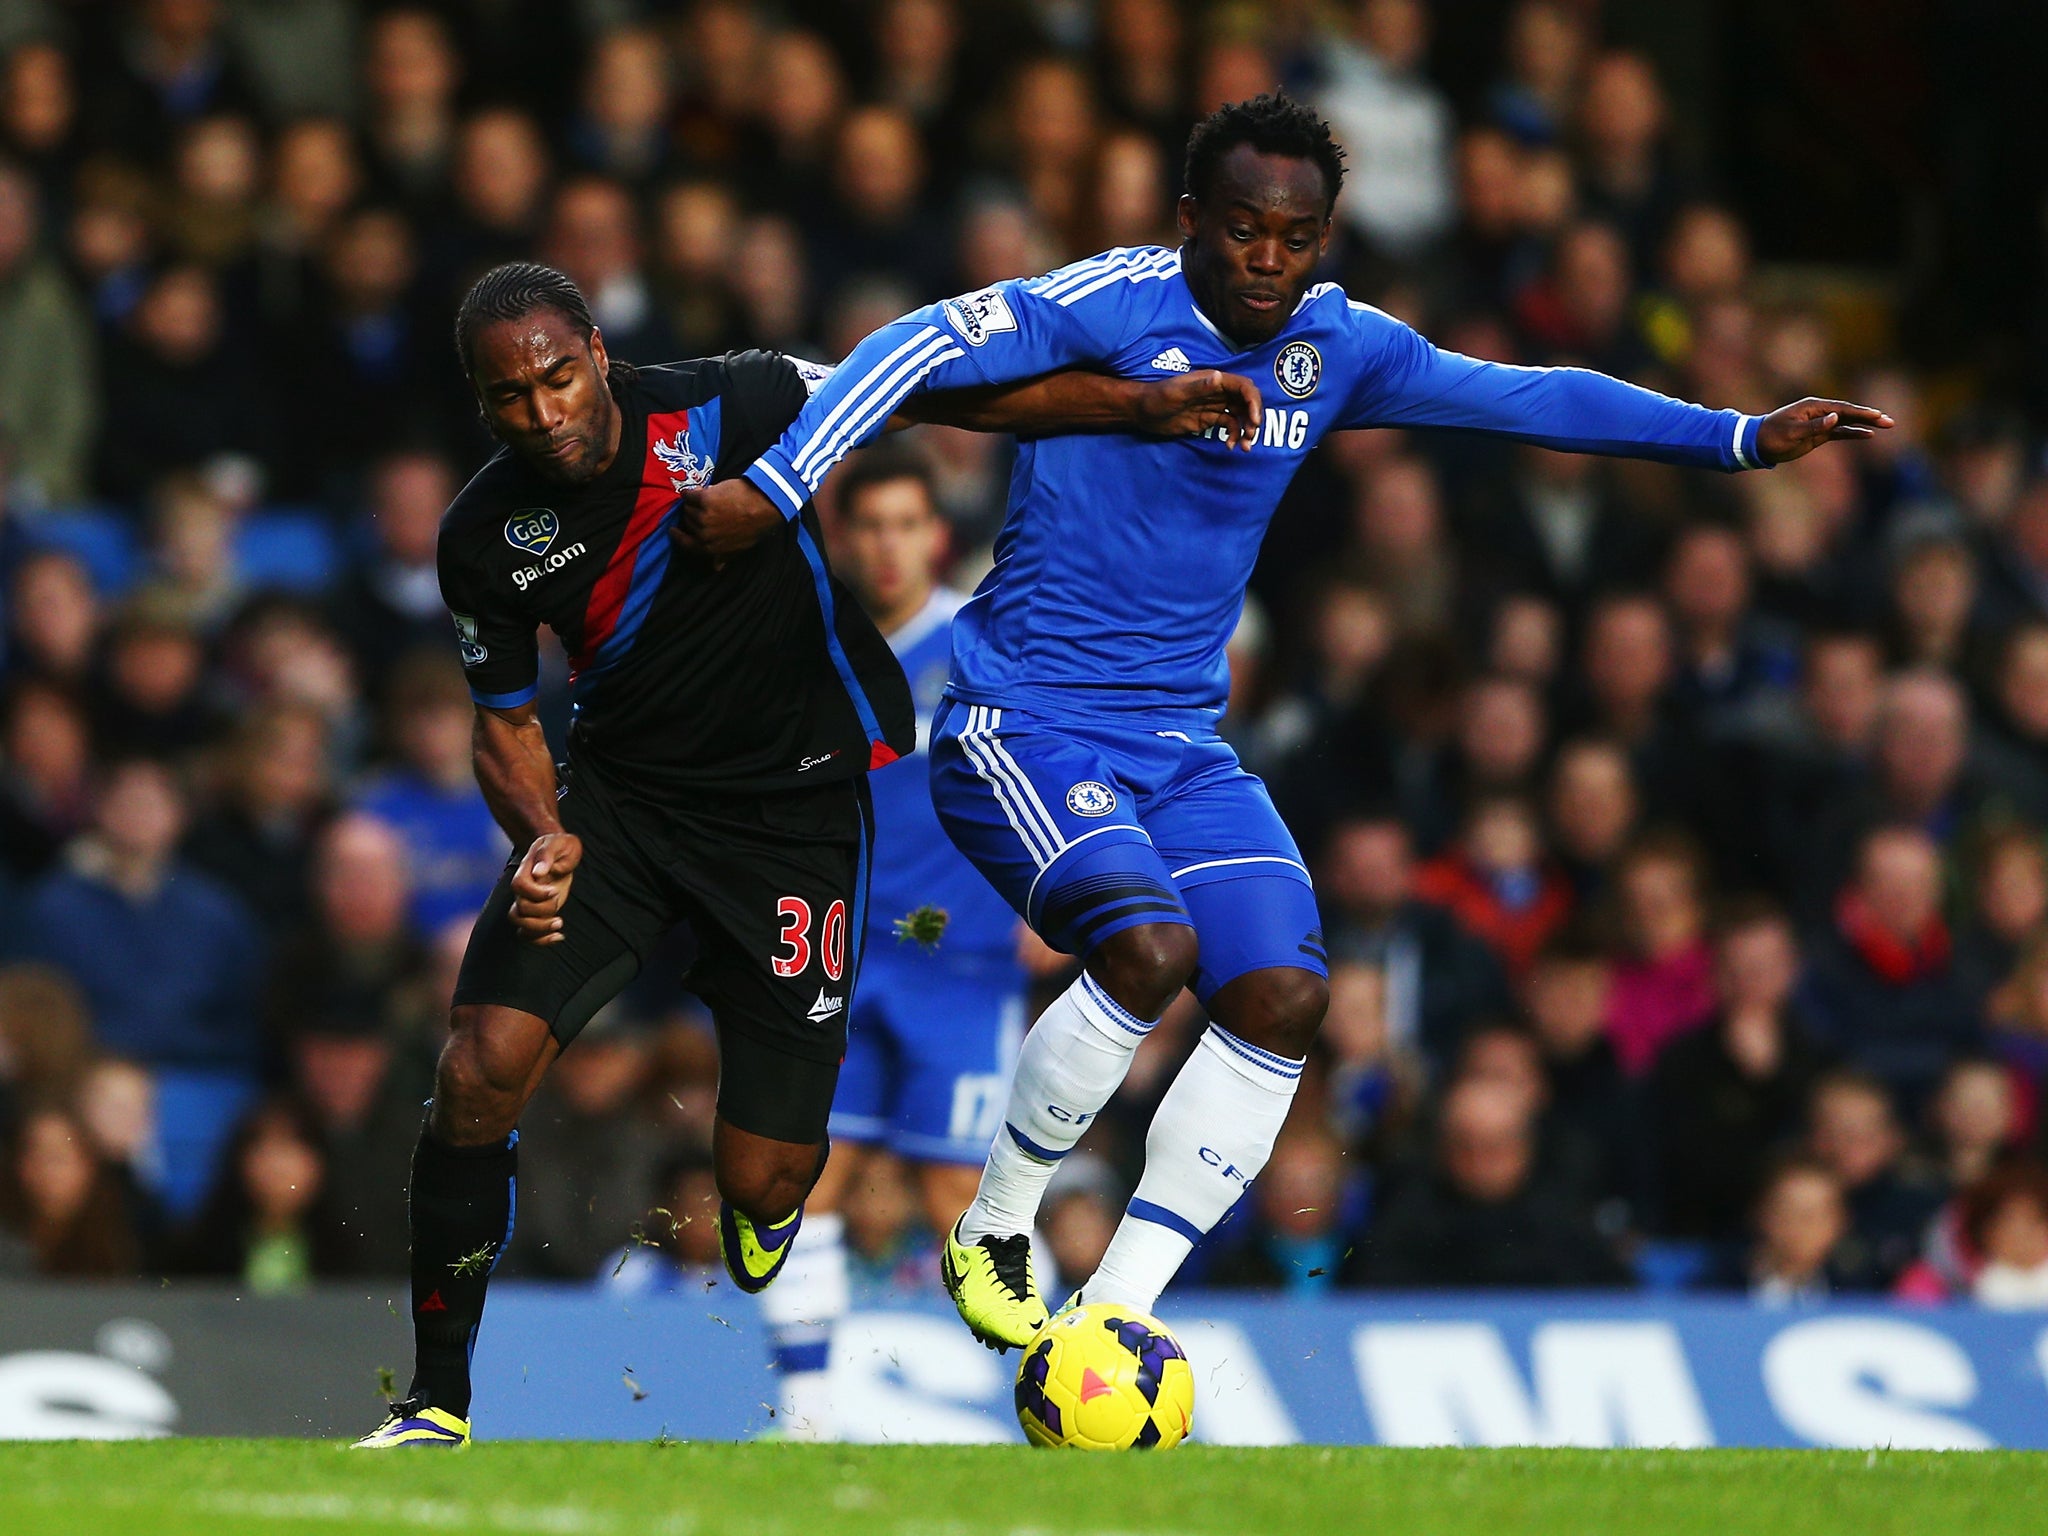 Chelsea midfielder Michael Essien could be on his way out of the club in January according to his agent